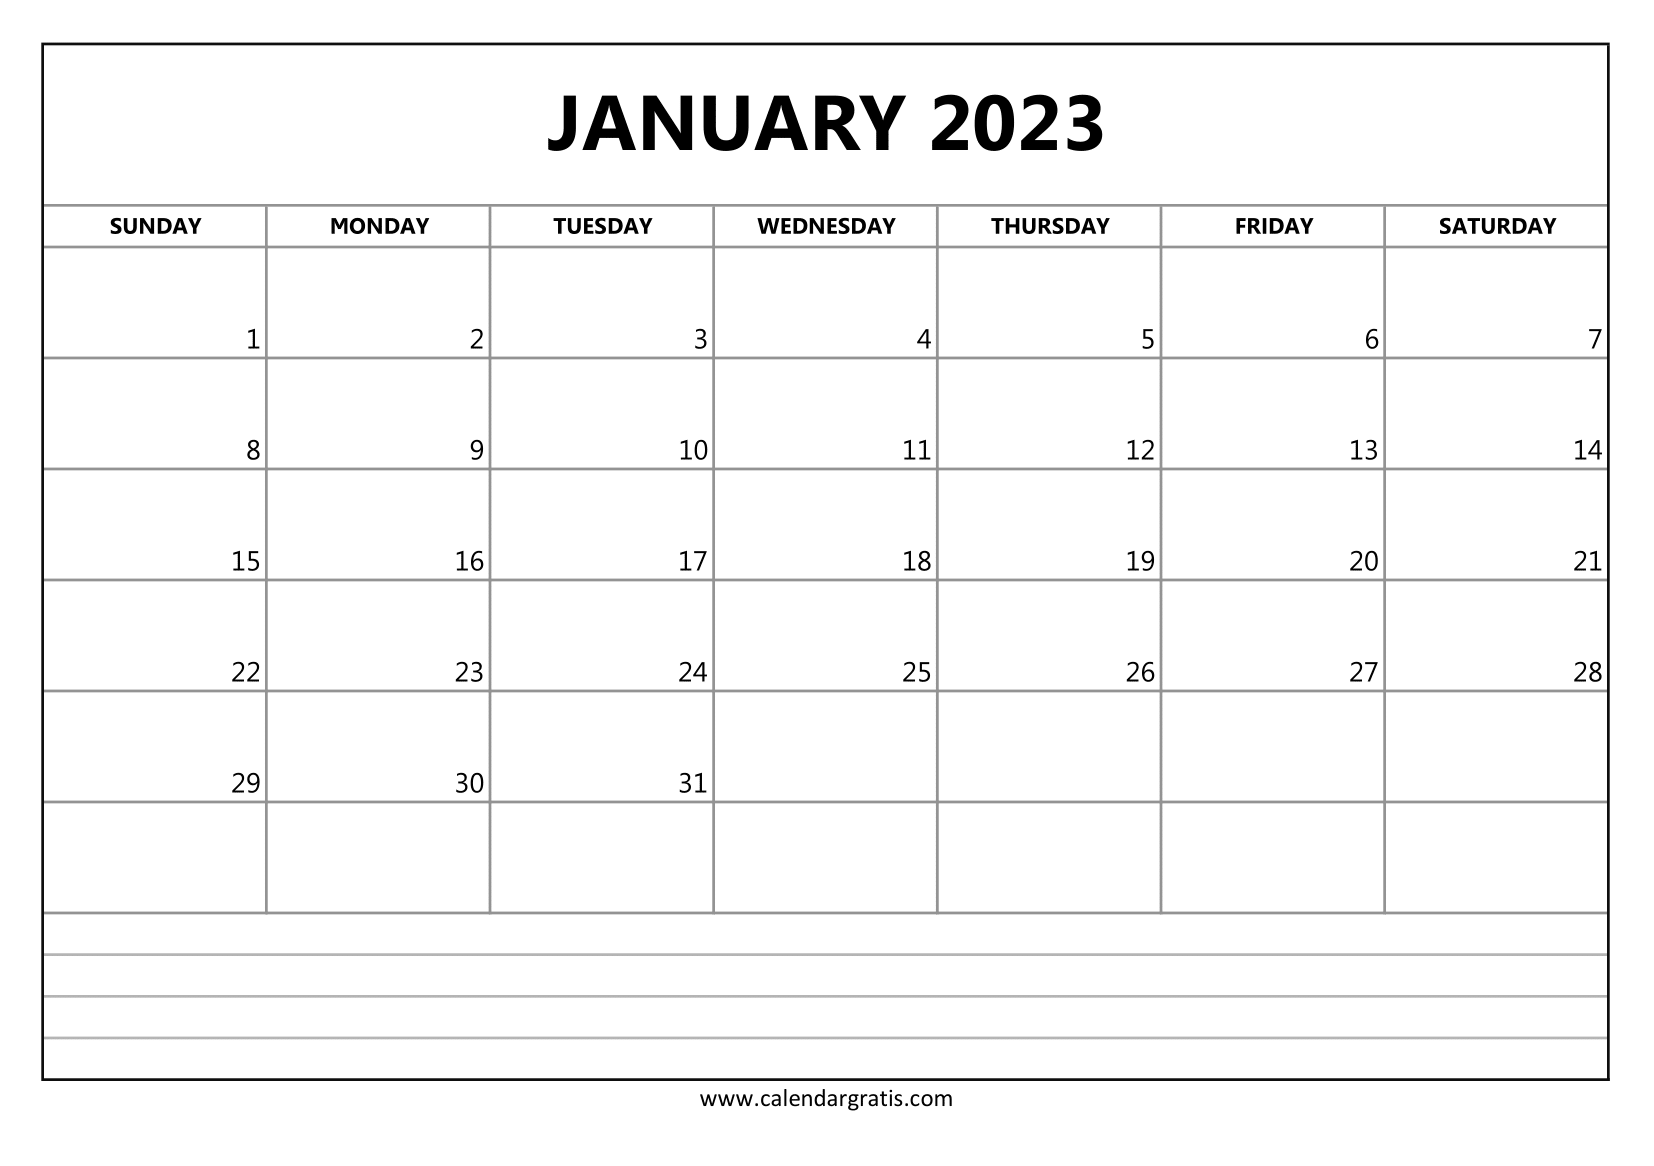 Free January 2023 calendar with notes section to print. Downloadable calendar template for students, teachers, parents, and employees.